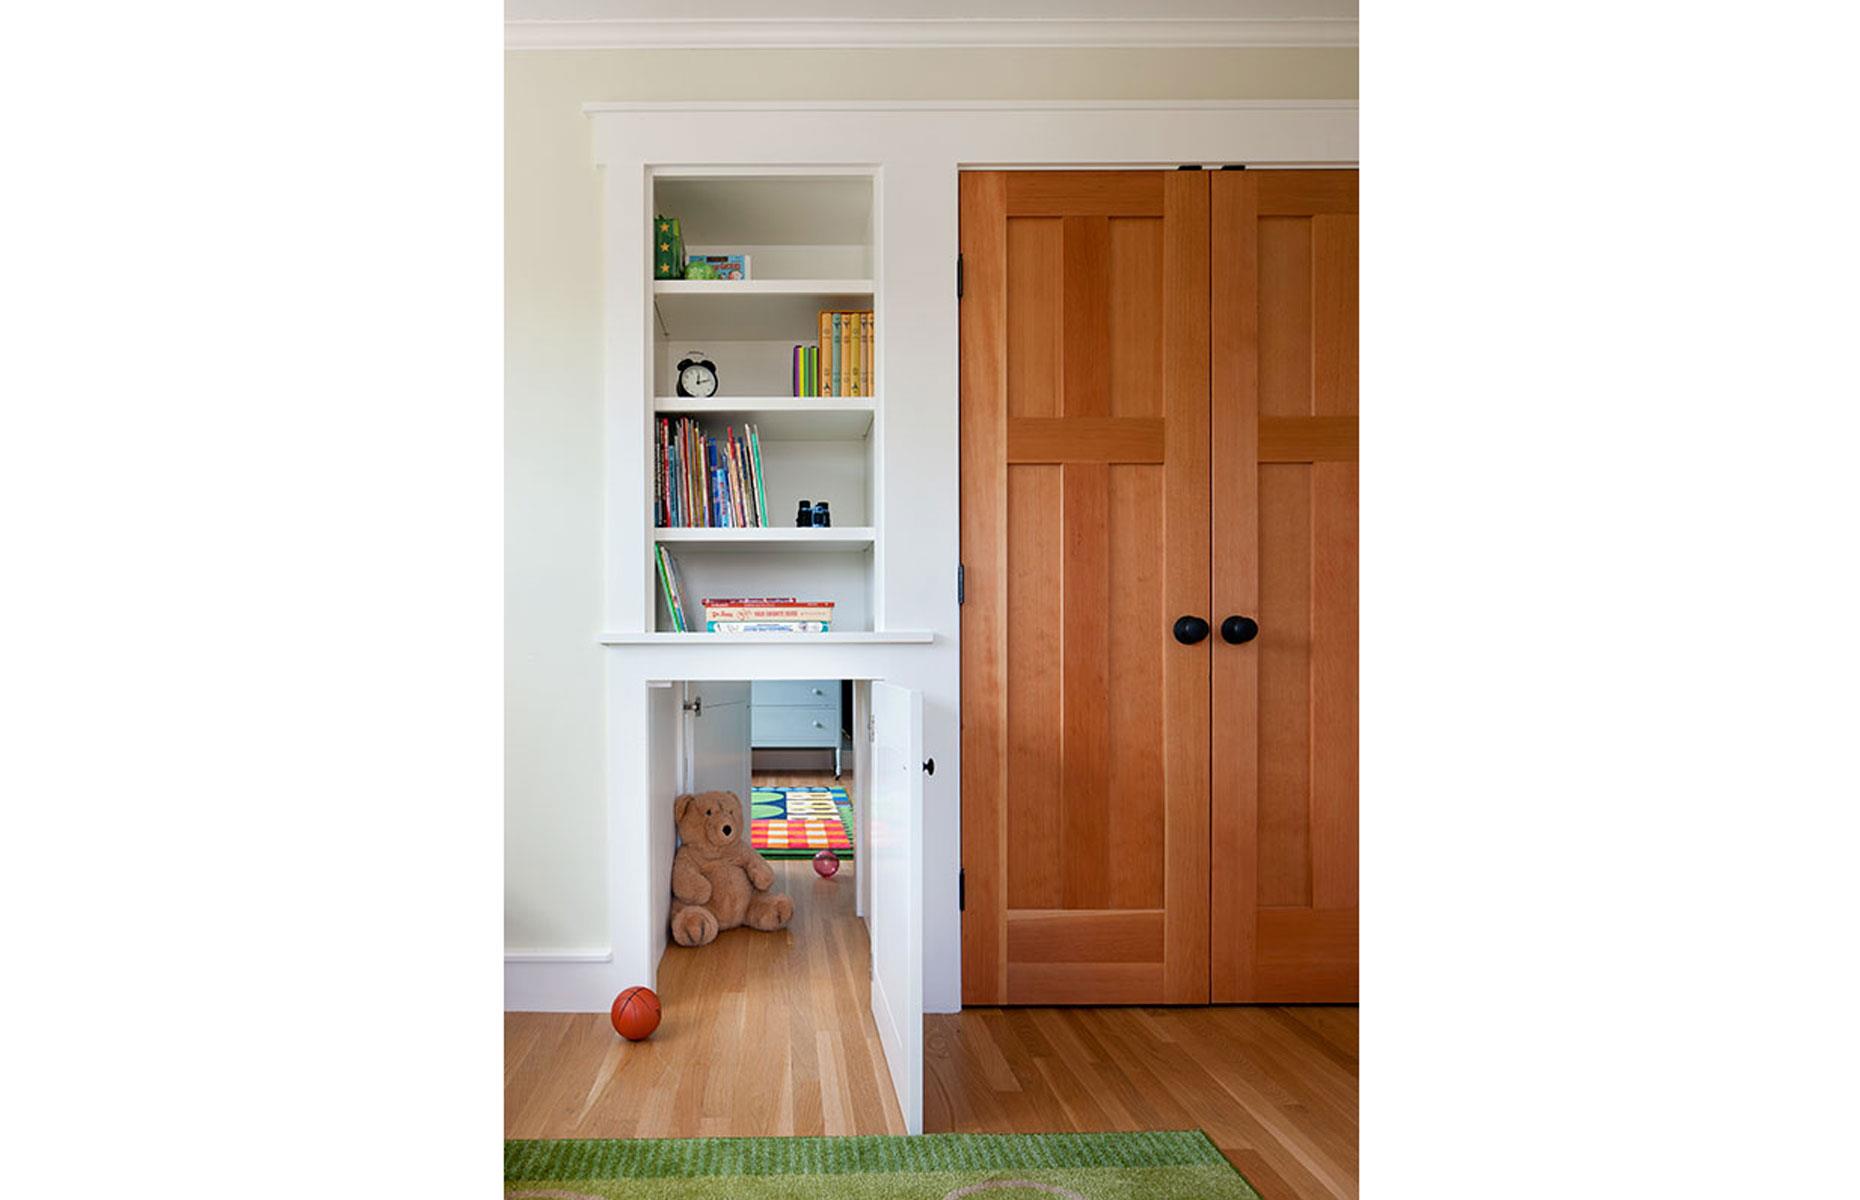 If the home's virtuous green credentials don't impress, this hidden mini passageway surely will – the tiny space links two of the children's bedrooms, and makes for an unexpected addition that no doubt provides hours of fun.